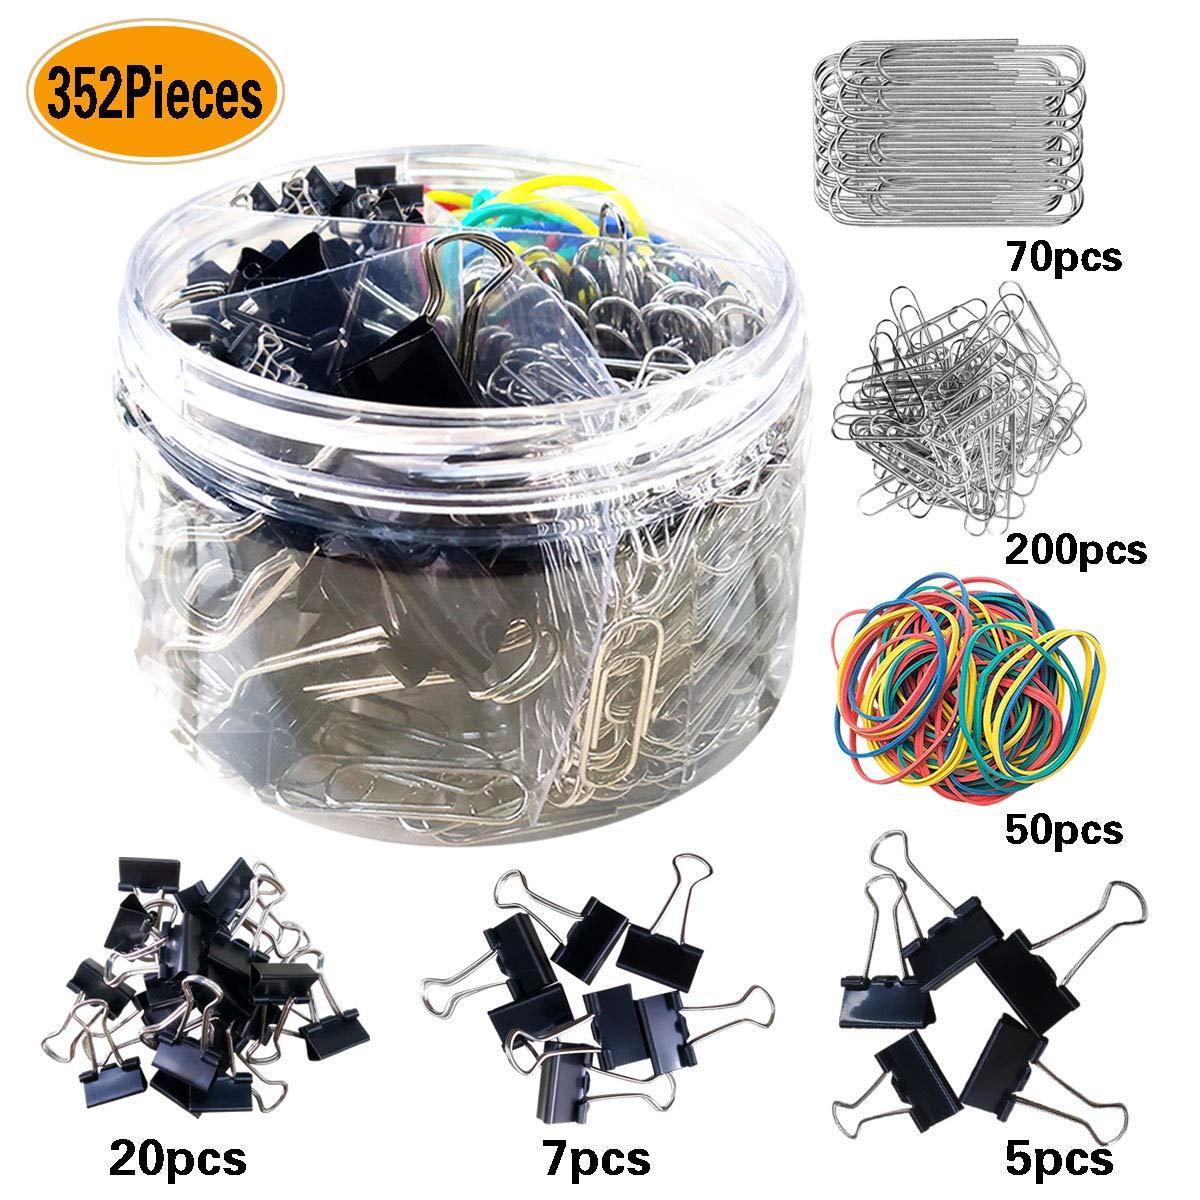 352 Pieces Assorted Black Mediuml/Small/Mini/Binder Clips, Jumbo/Small Sliver Paper Clips, Muti-Colored Rubber Bands, for Office School Clips and Personal Document Organizing